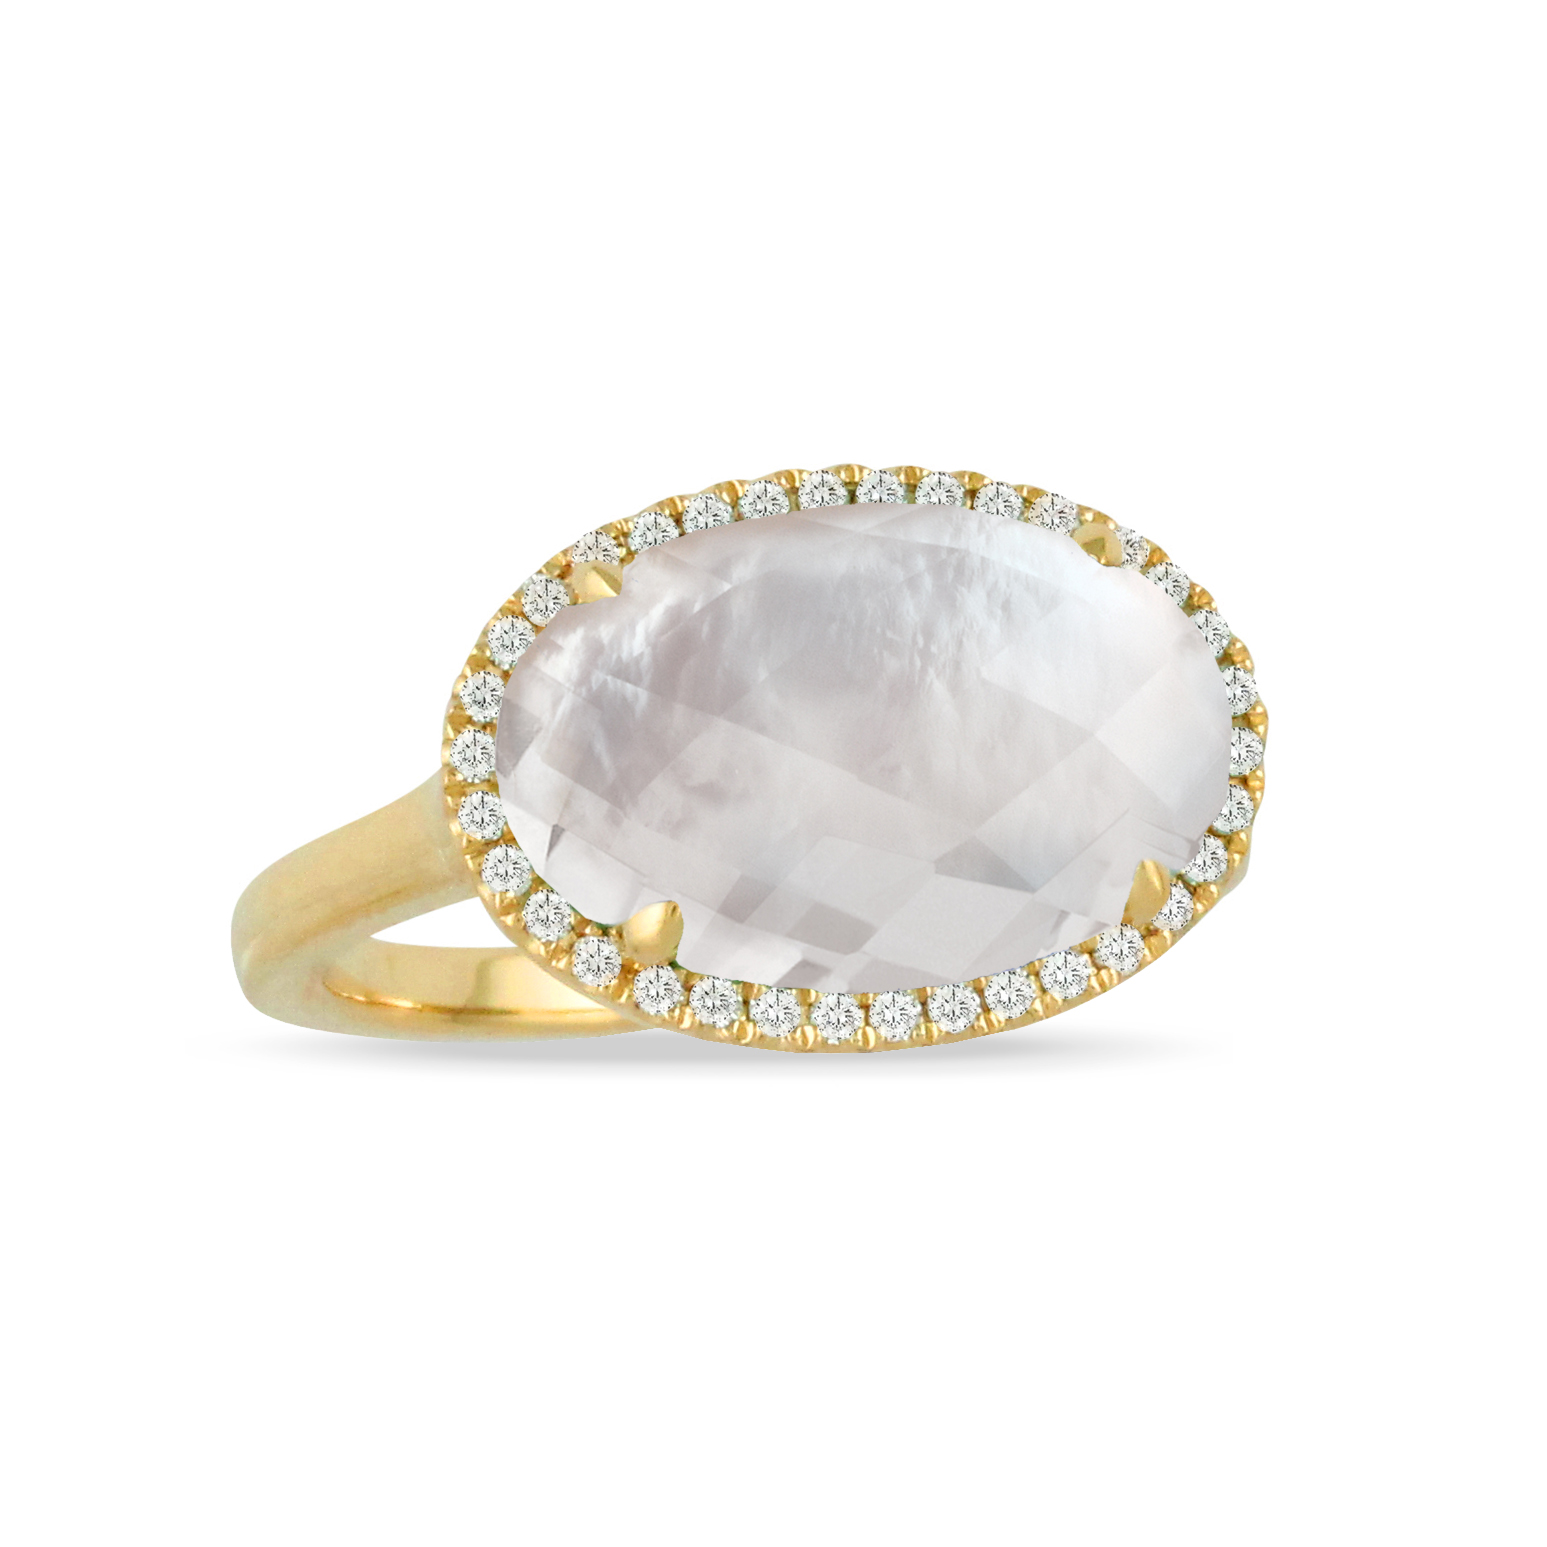 18K Yellow Gold Pearl Fashion Ring - 18K Yellow Gold Diamond Ring With Clear Quartz Over White Mother Of Pearl